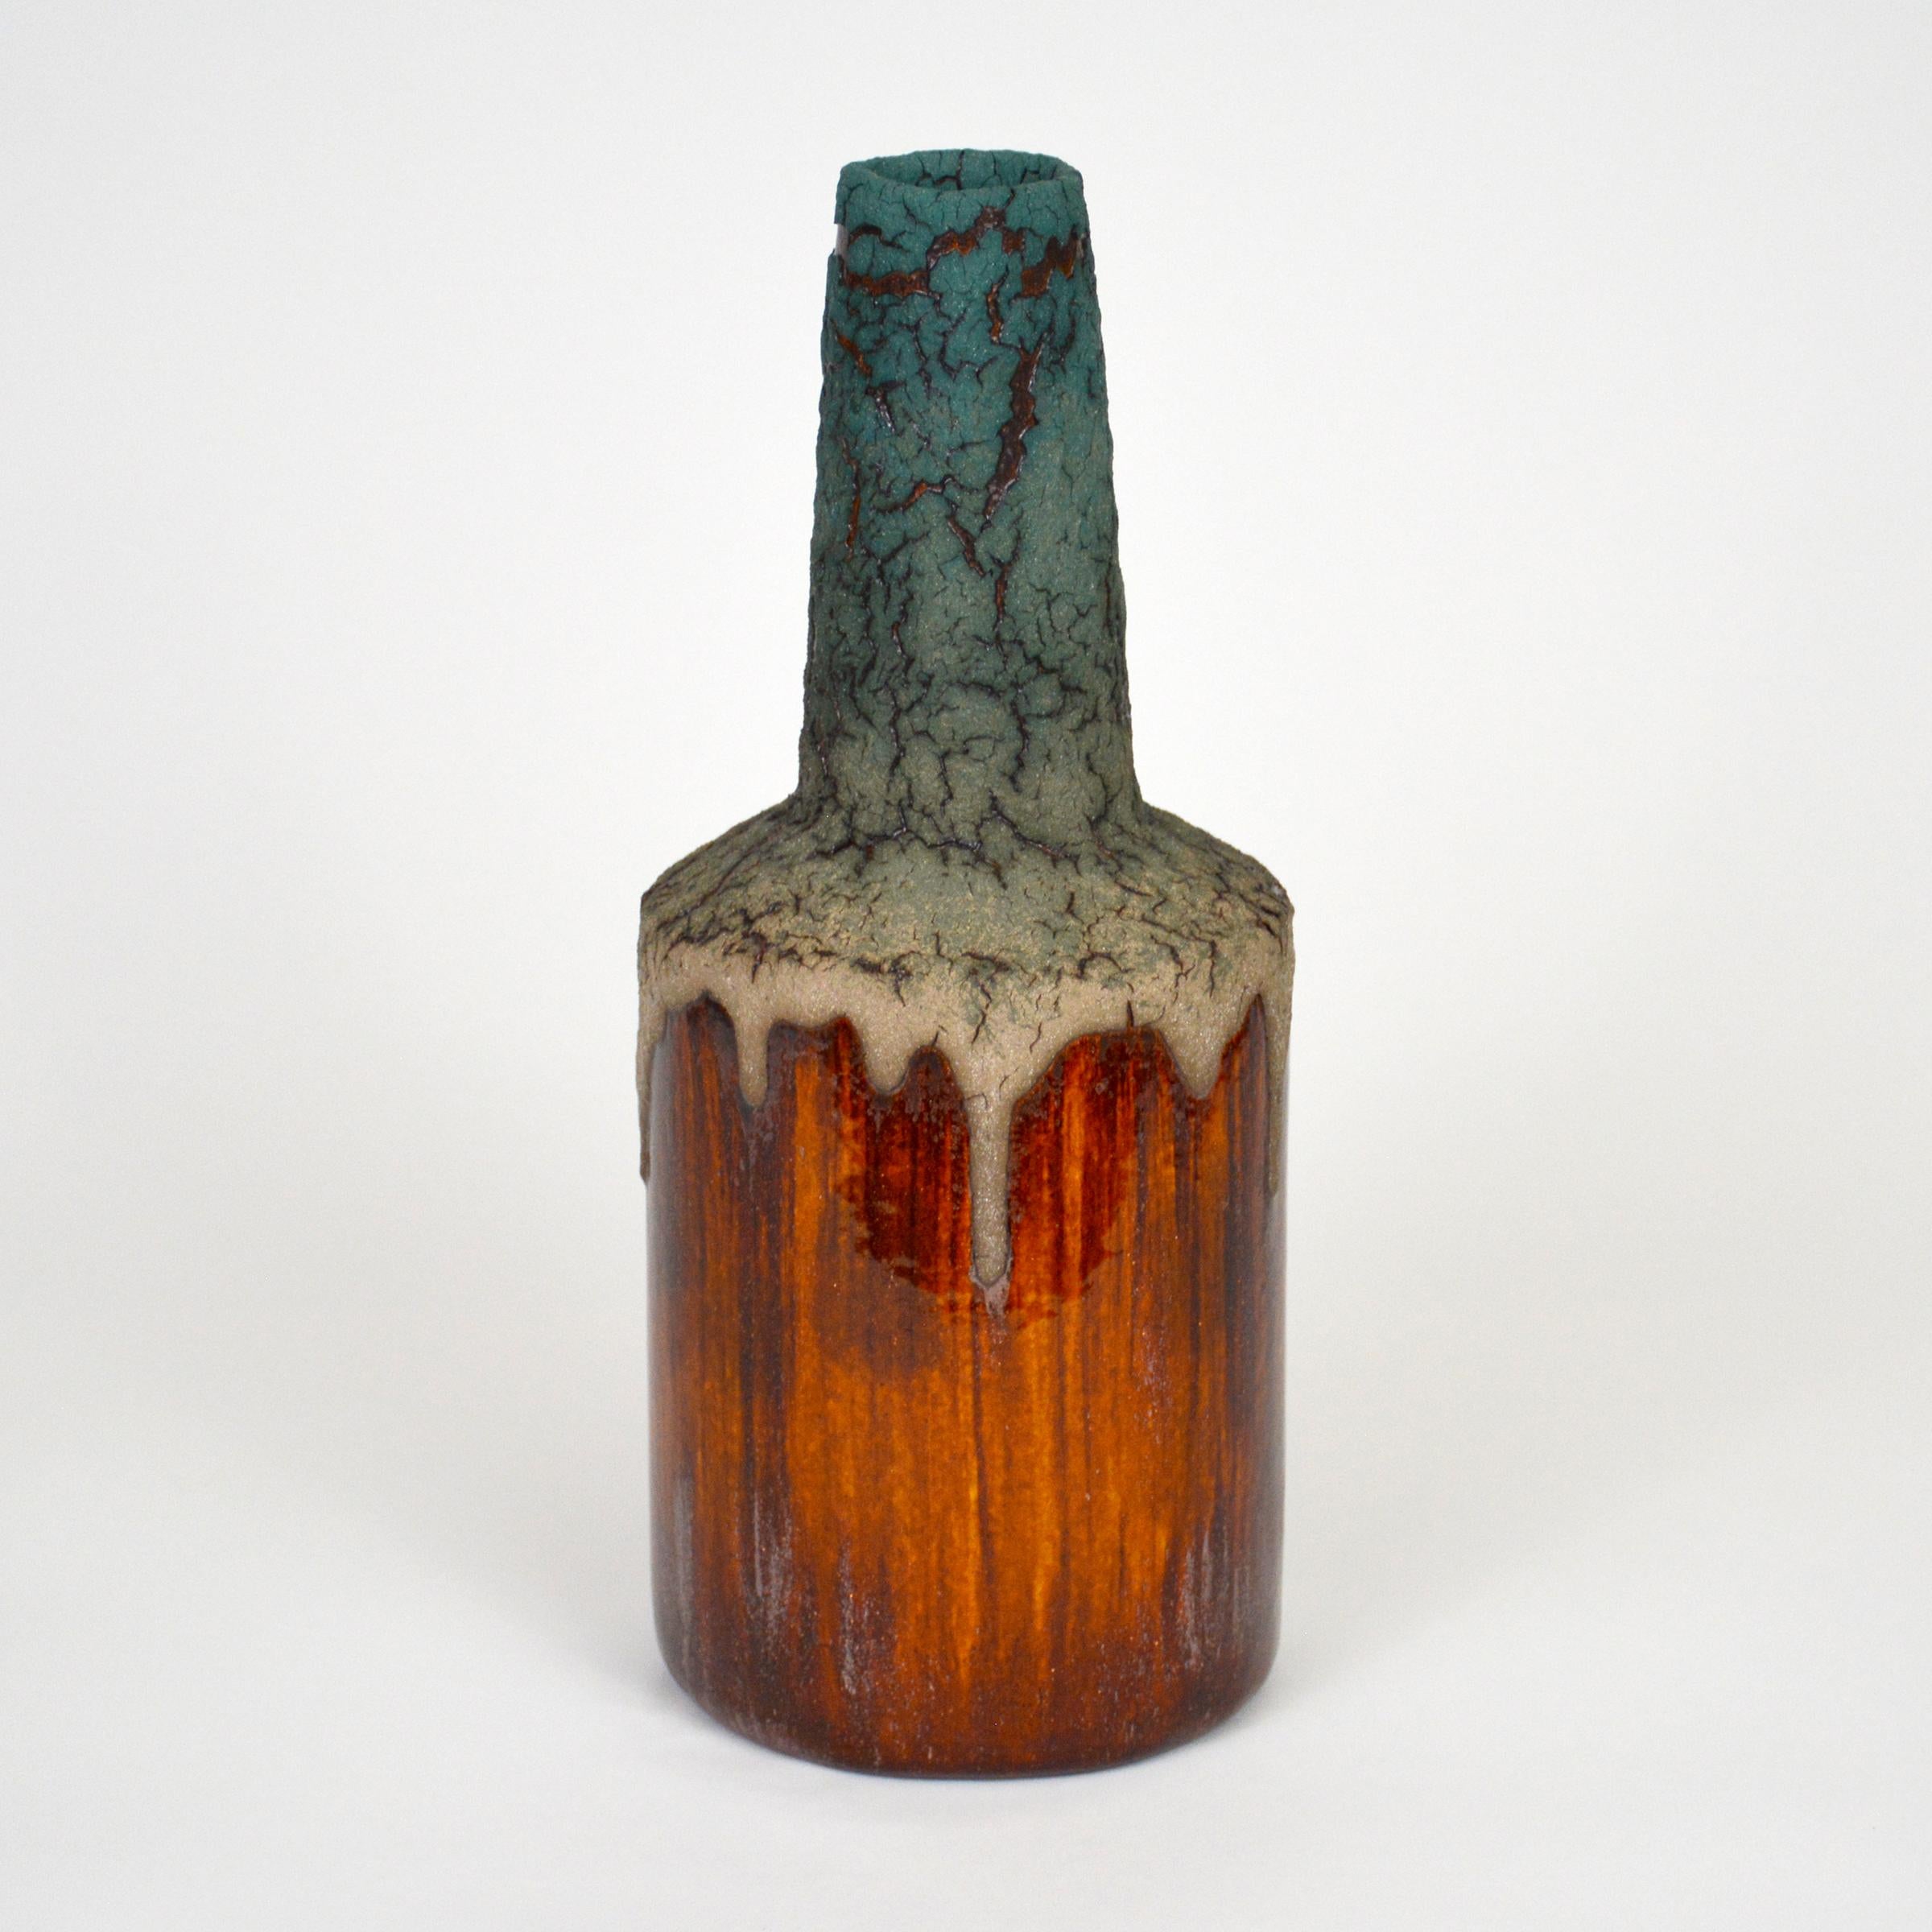 Turquoise Lava Ceramic Bottle by William Edwards
Hand built earthenware vessel, fired multiple times to achieve a textured surface of random abstraction, matte glaze with amber gloss metallic, microcrystalline glaze breaking through that sparkles in